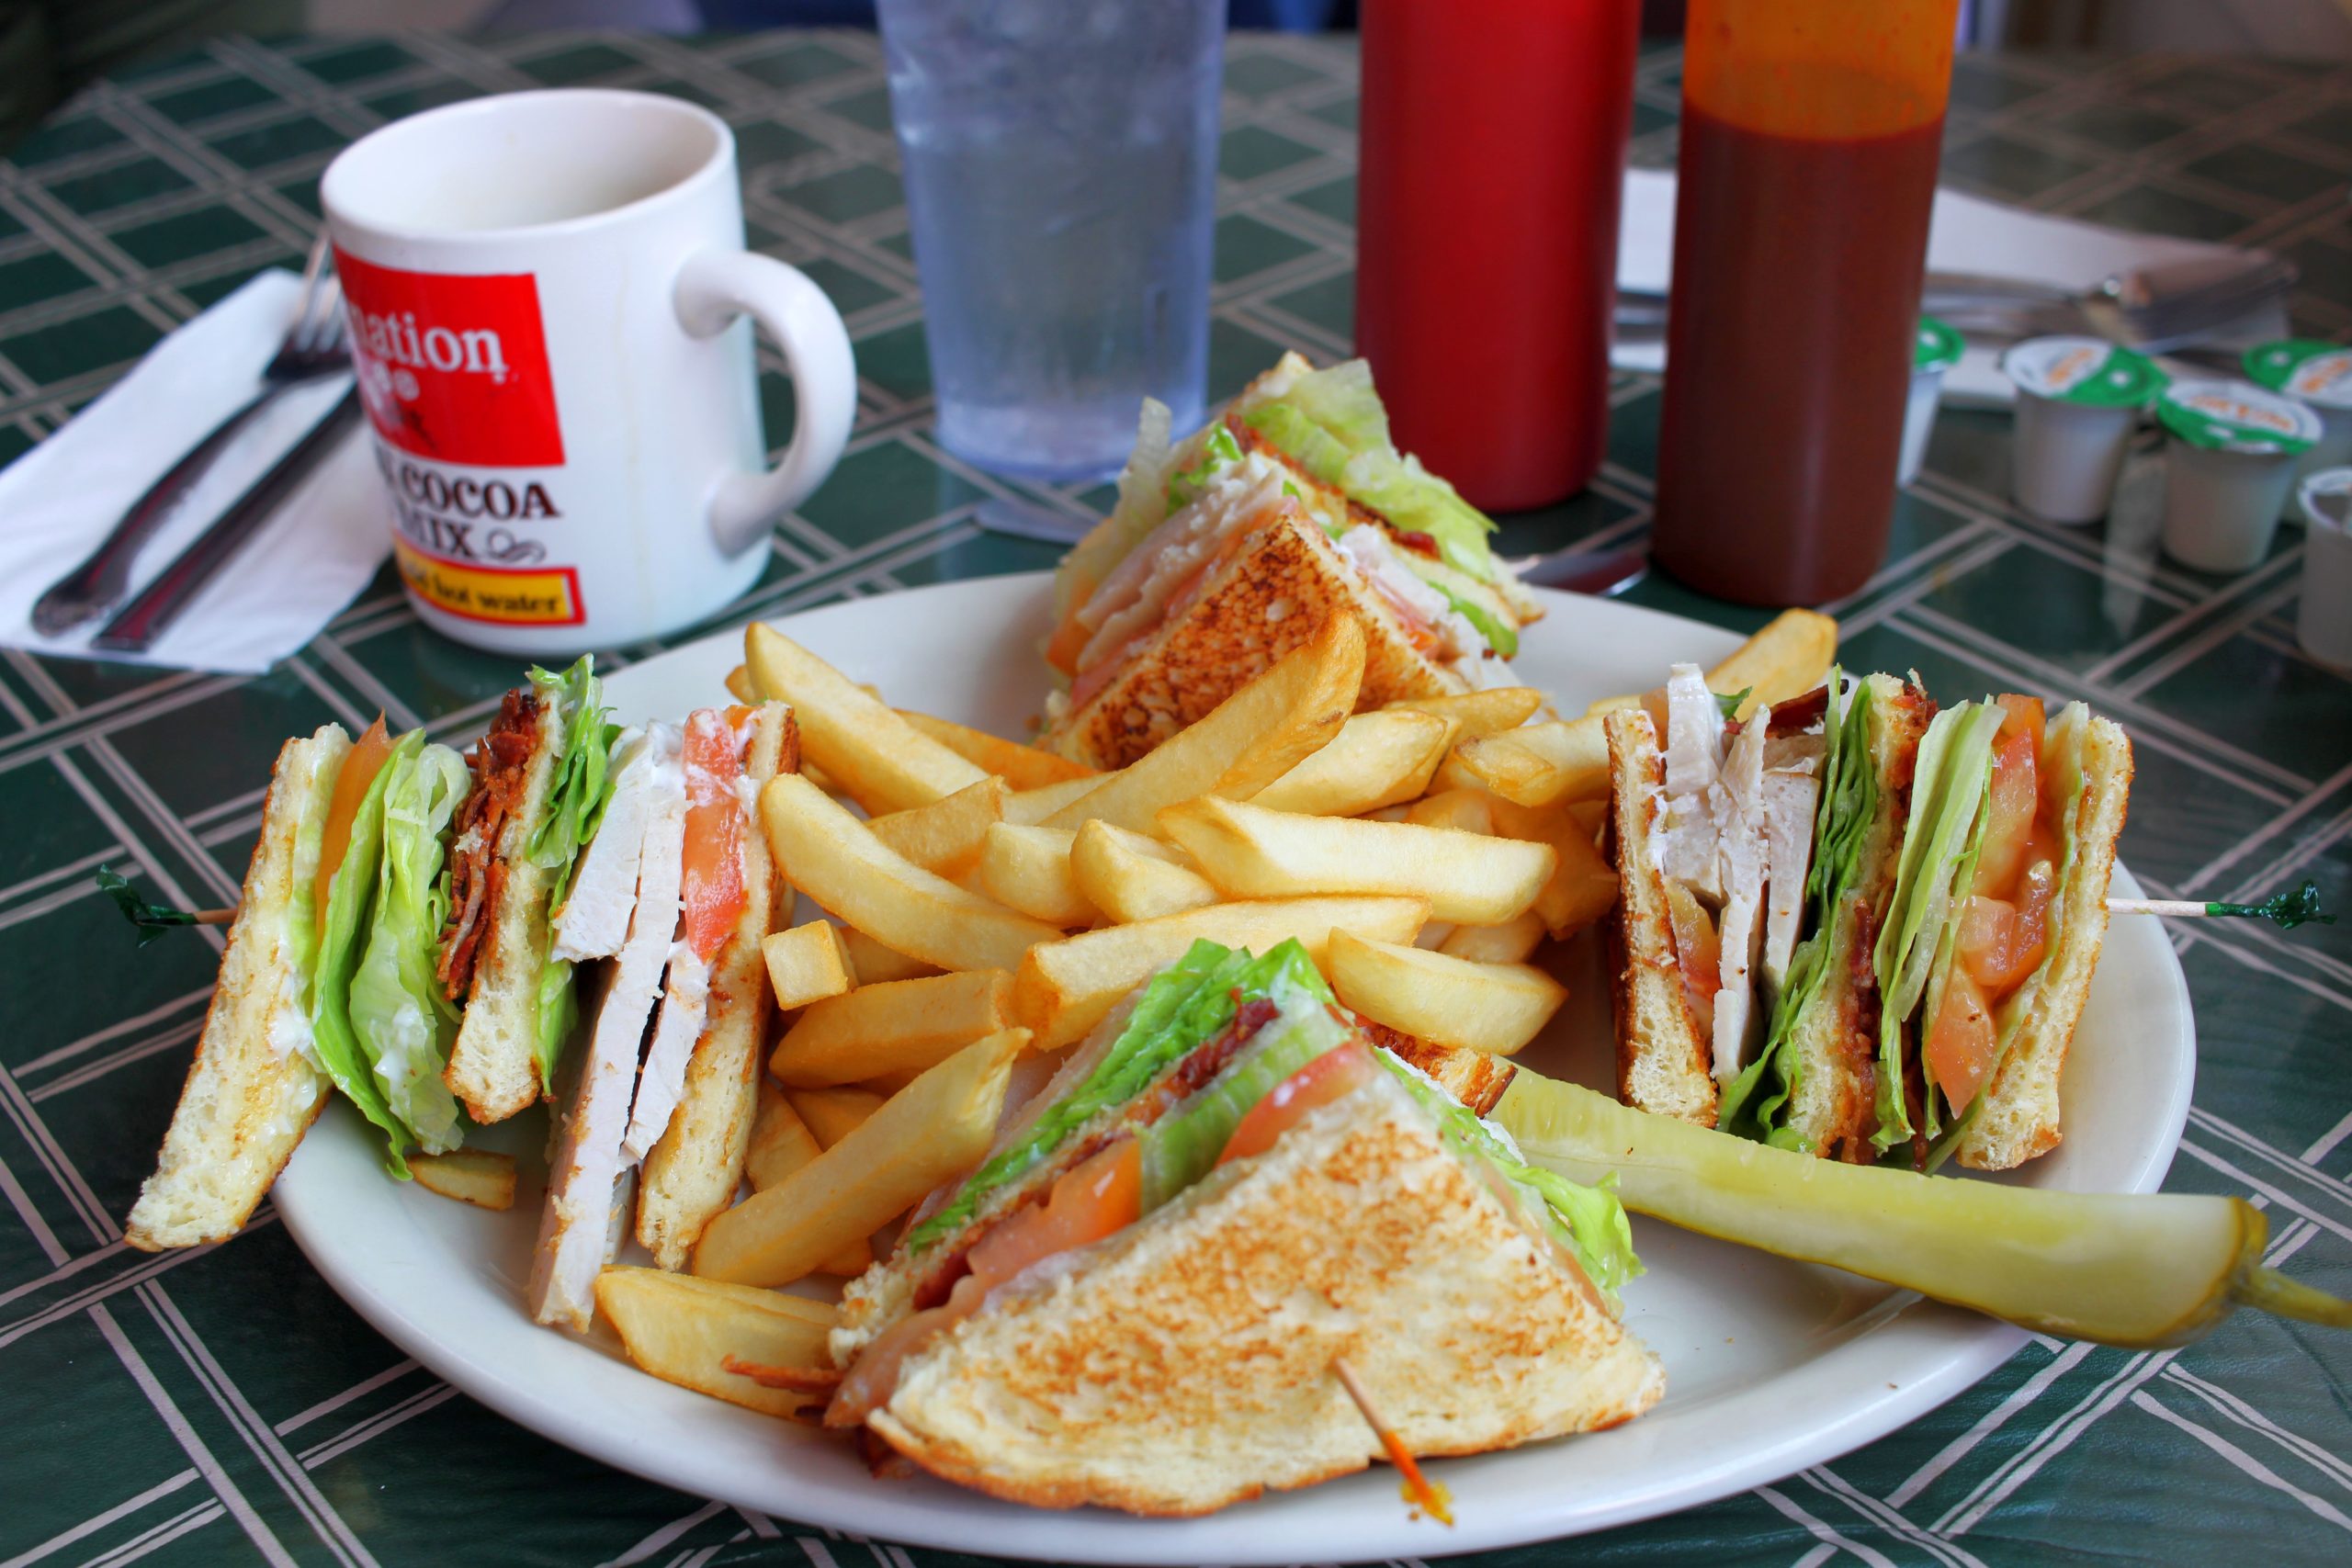 a picture of a club sandwich, fries, and a pickle